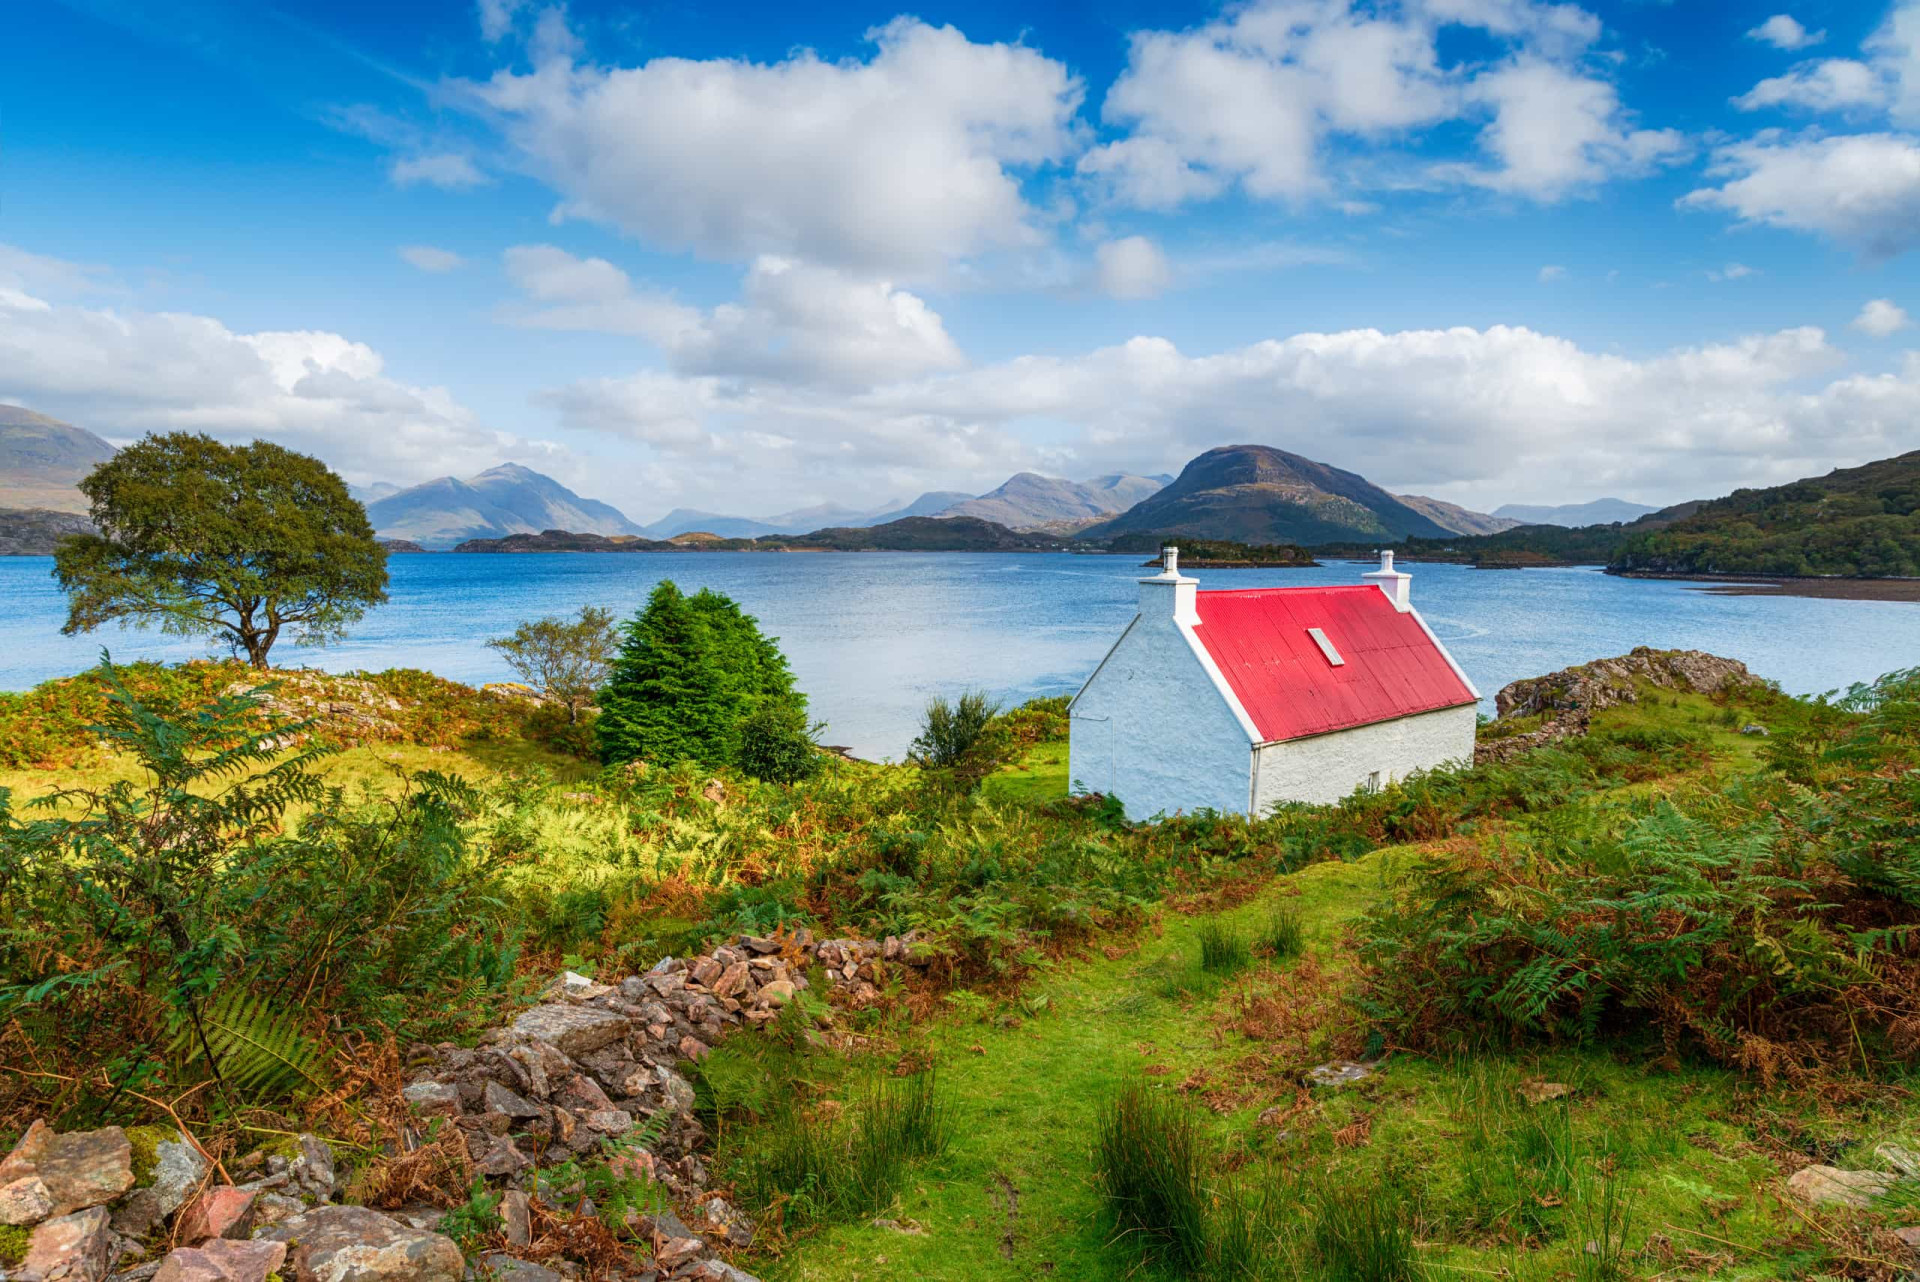 <p>Far up north in Scotland lies the Isle of Skye. It is situated in the Scottish Highlands and has some of the best beaches Scotland can offer. It may not be very sunny, but the incredible views make up for this.</p><p>You may also like:<a href="https://www.starsinsider.com/n/233723?utm_source=msn.com&utm_medium=display&utm_campaign=referral_description&utm_content=471299v4en-en"> Ridiculous products you won't believe actually exist</a></p>